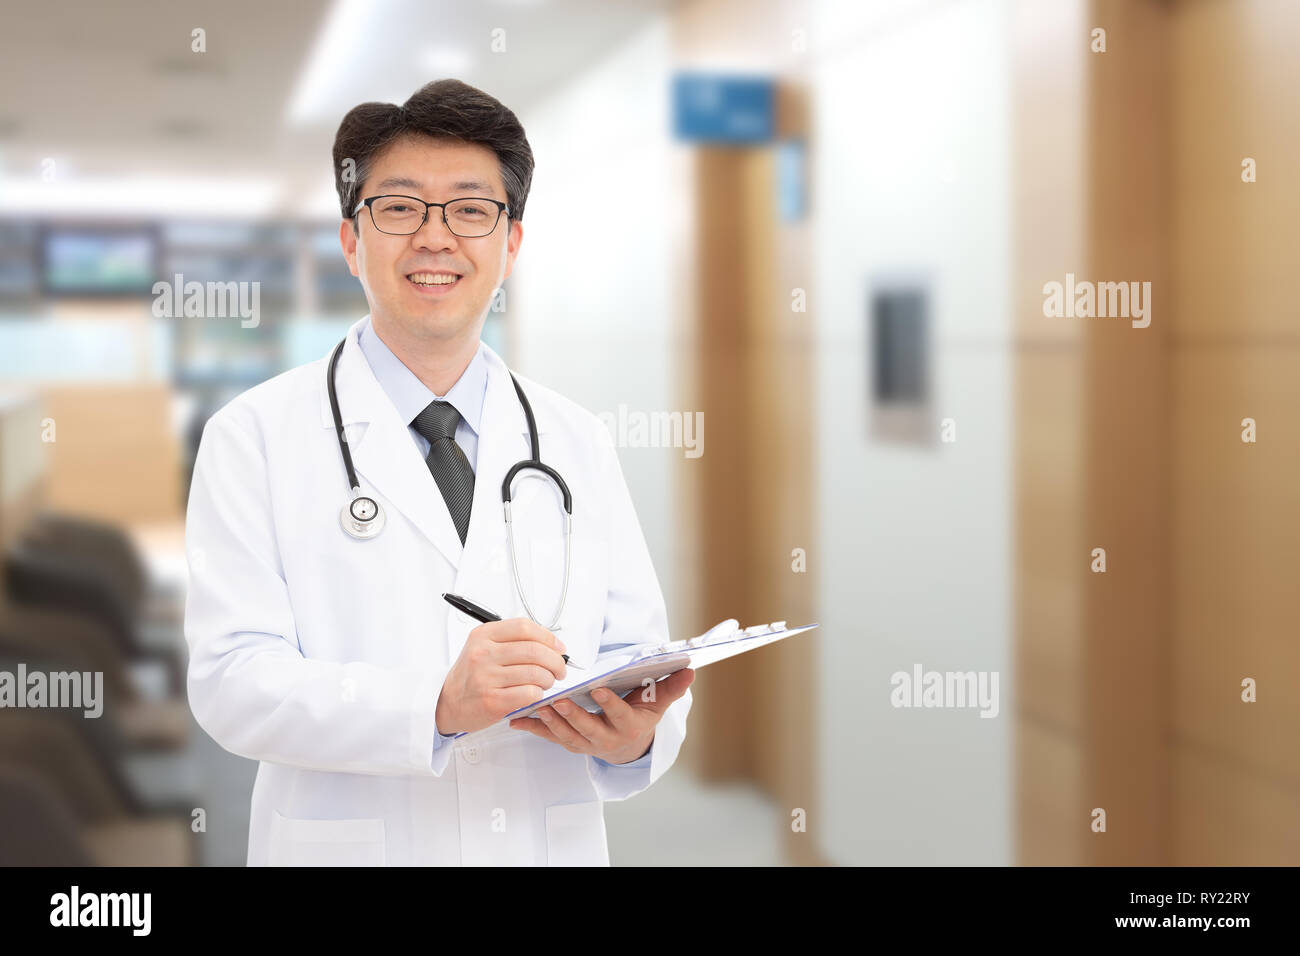 Asian male doctor smiling in the background of the hospital. Stock Photo